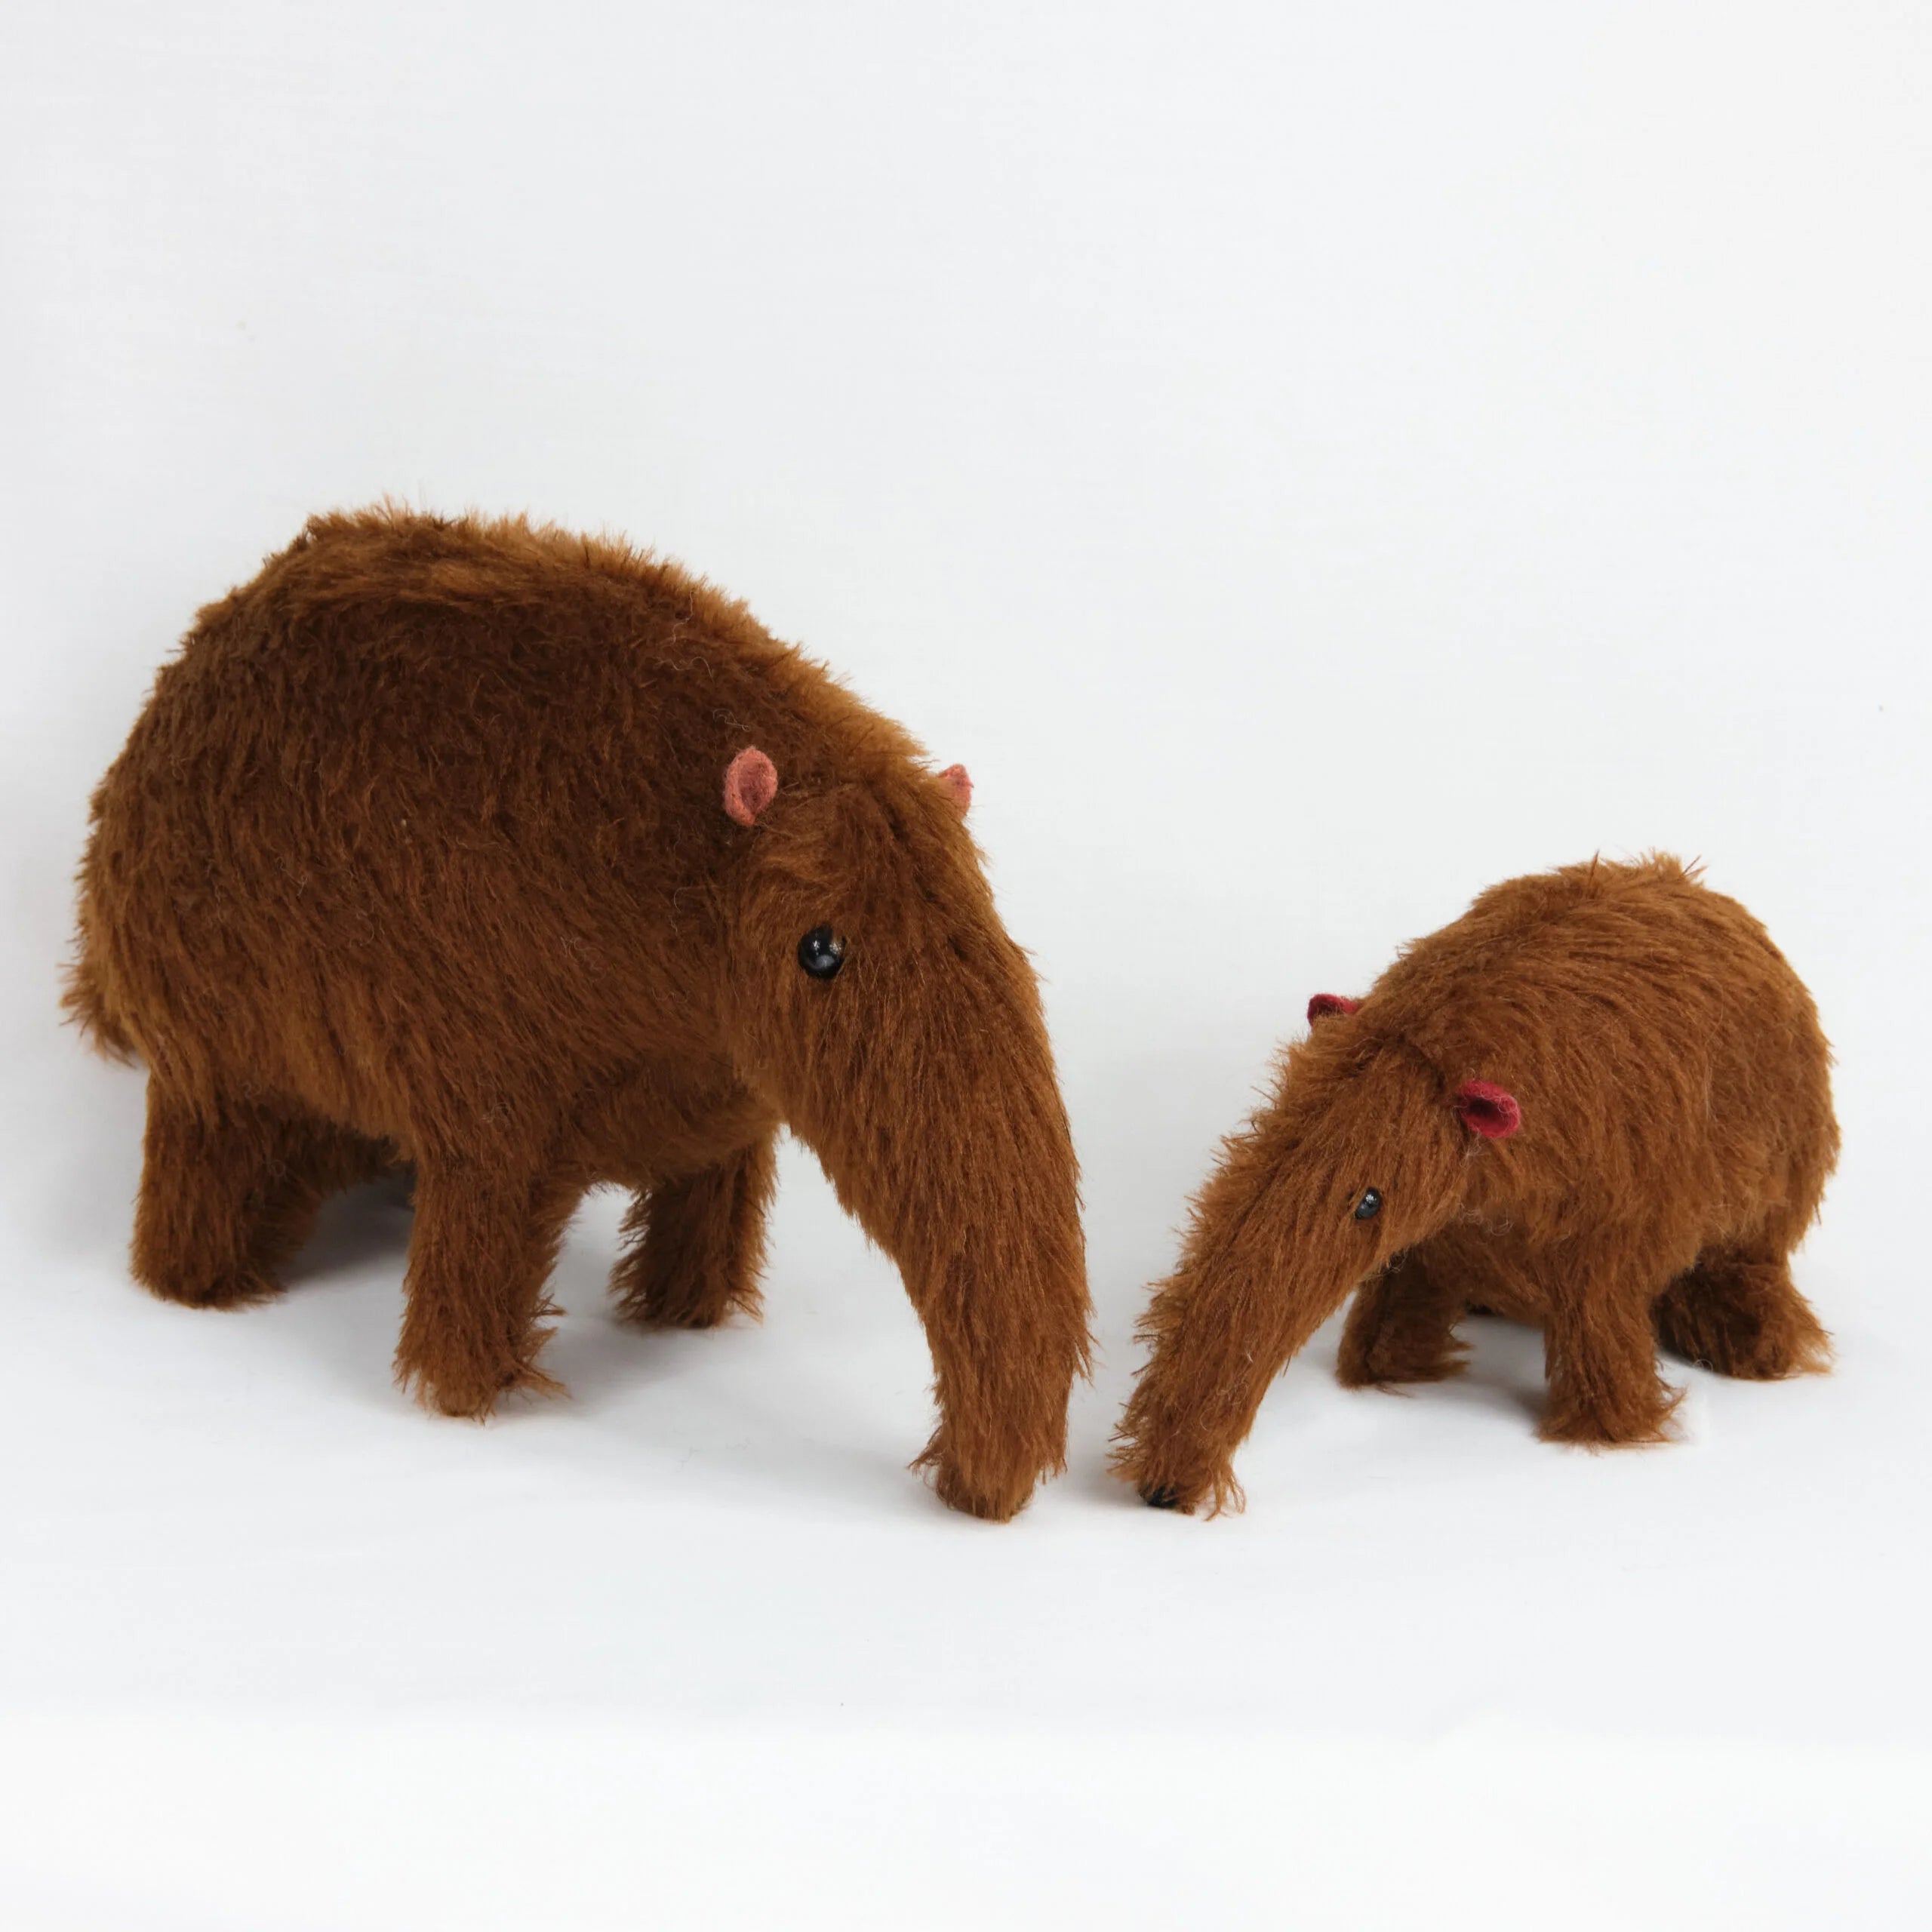 Gladys The Handmade Anteater from Canterbury Bears.